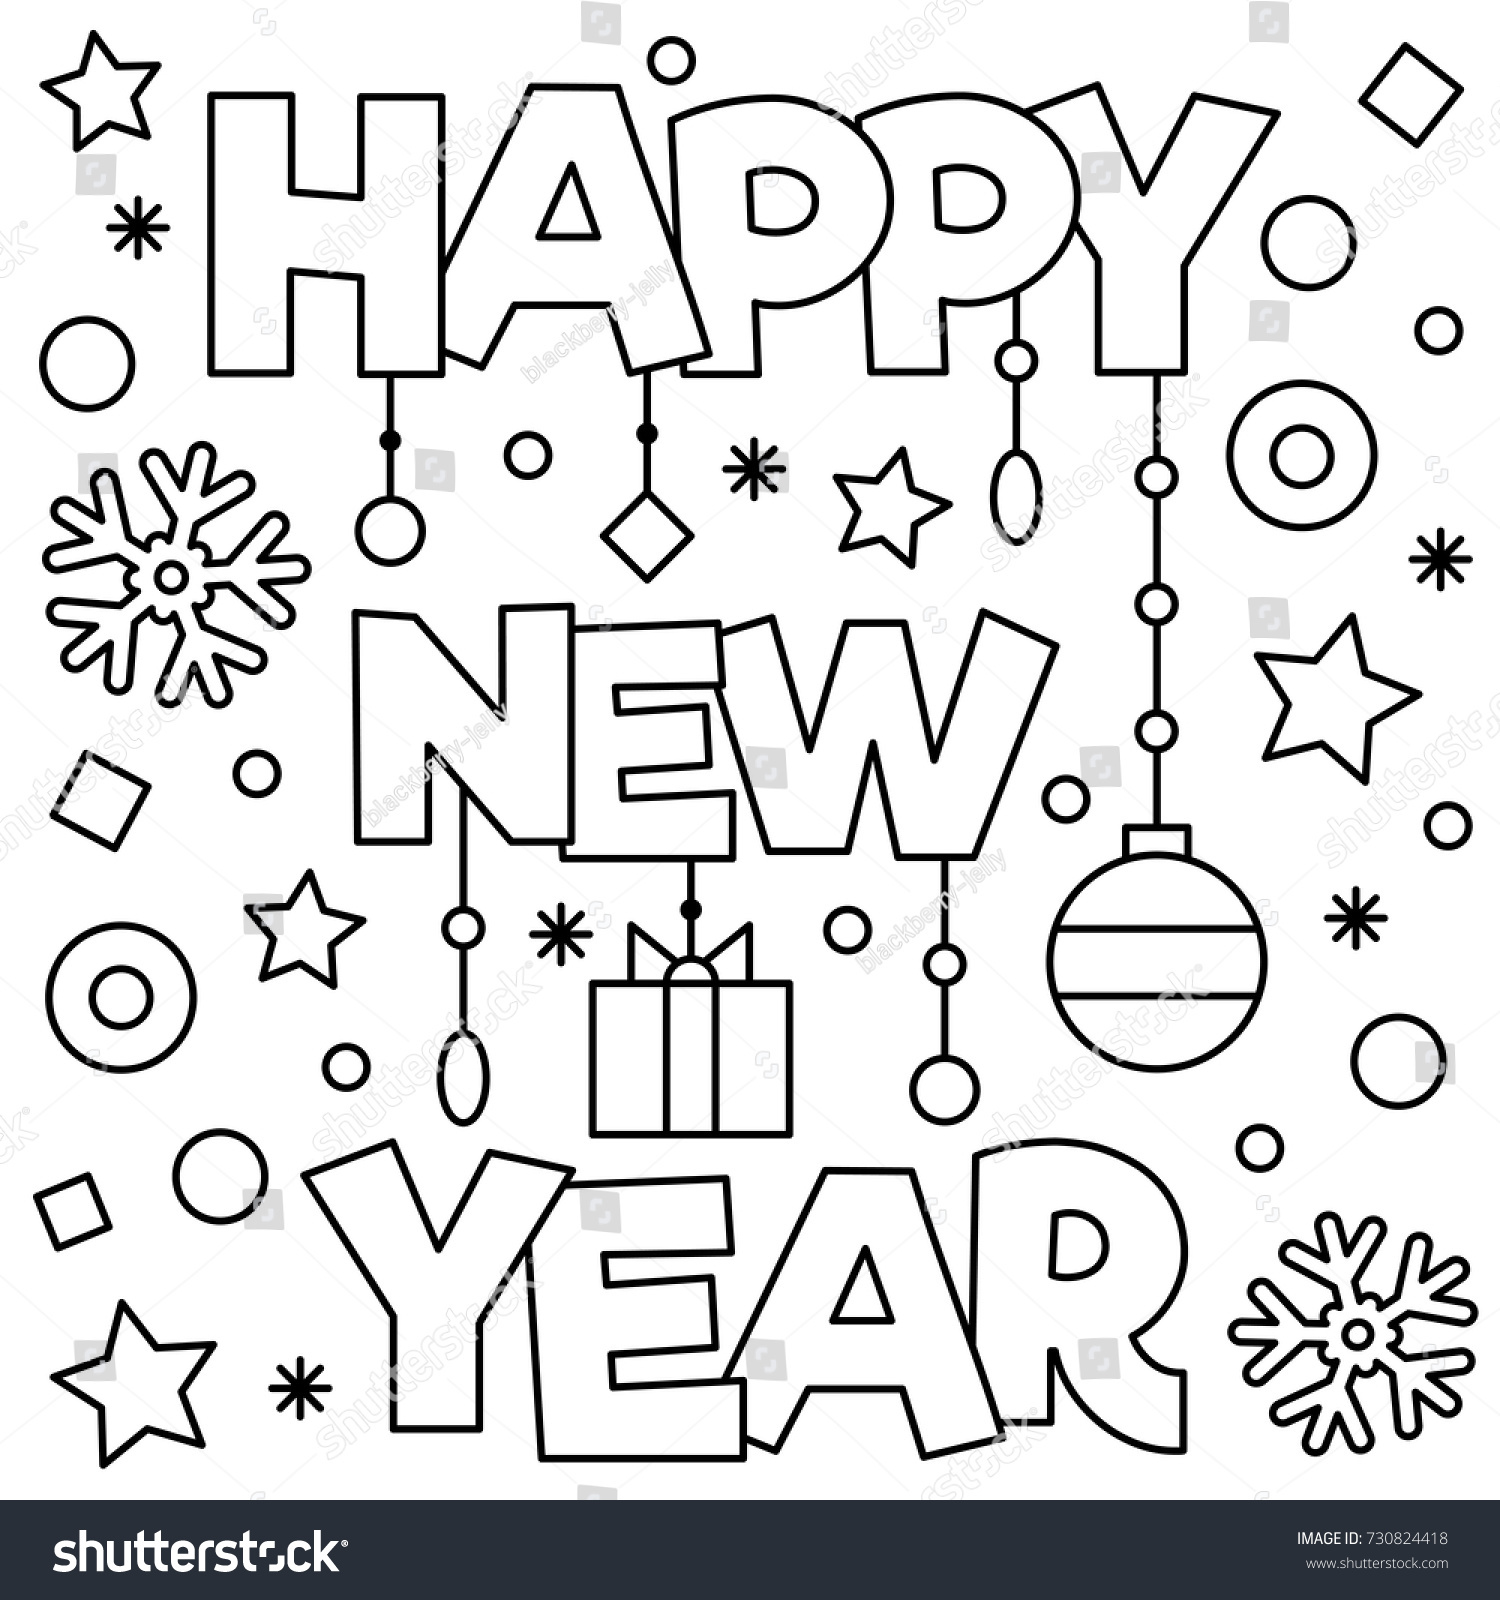 Happy New Year Coloring page Vector illustration